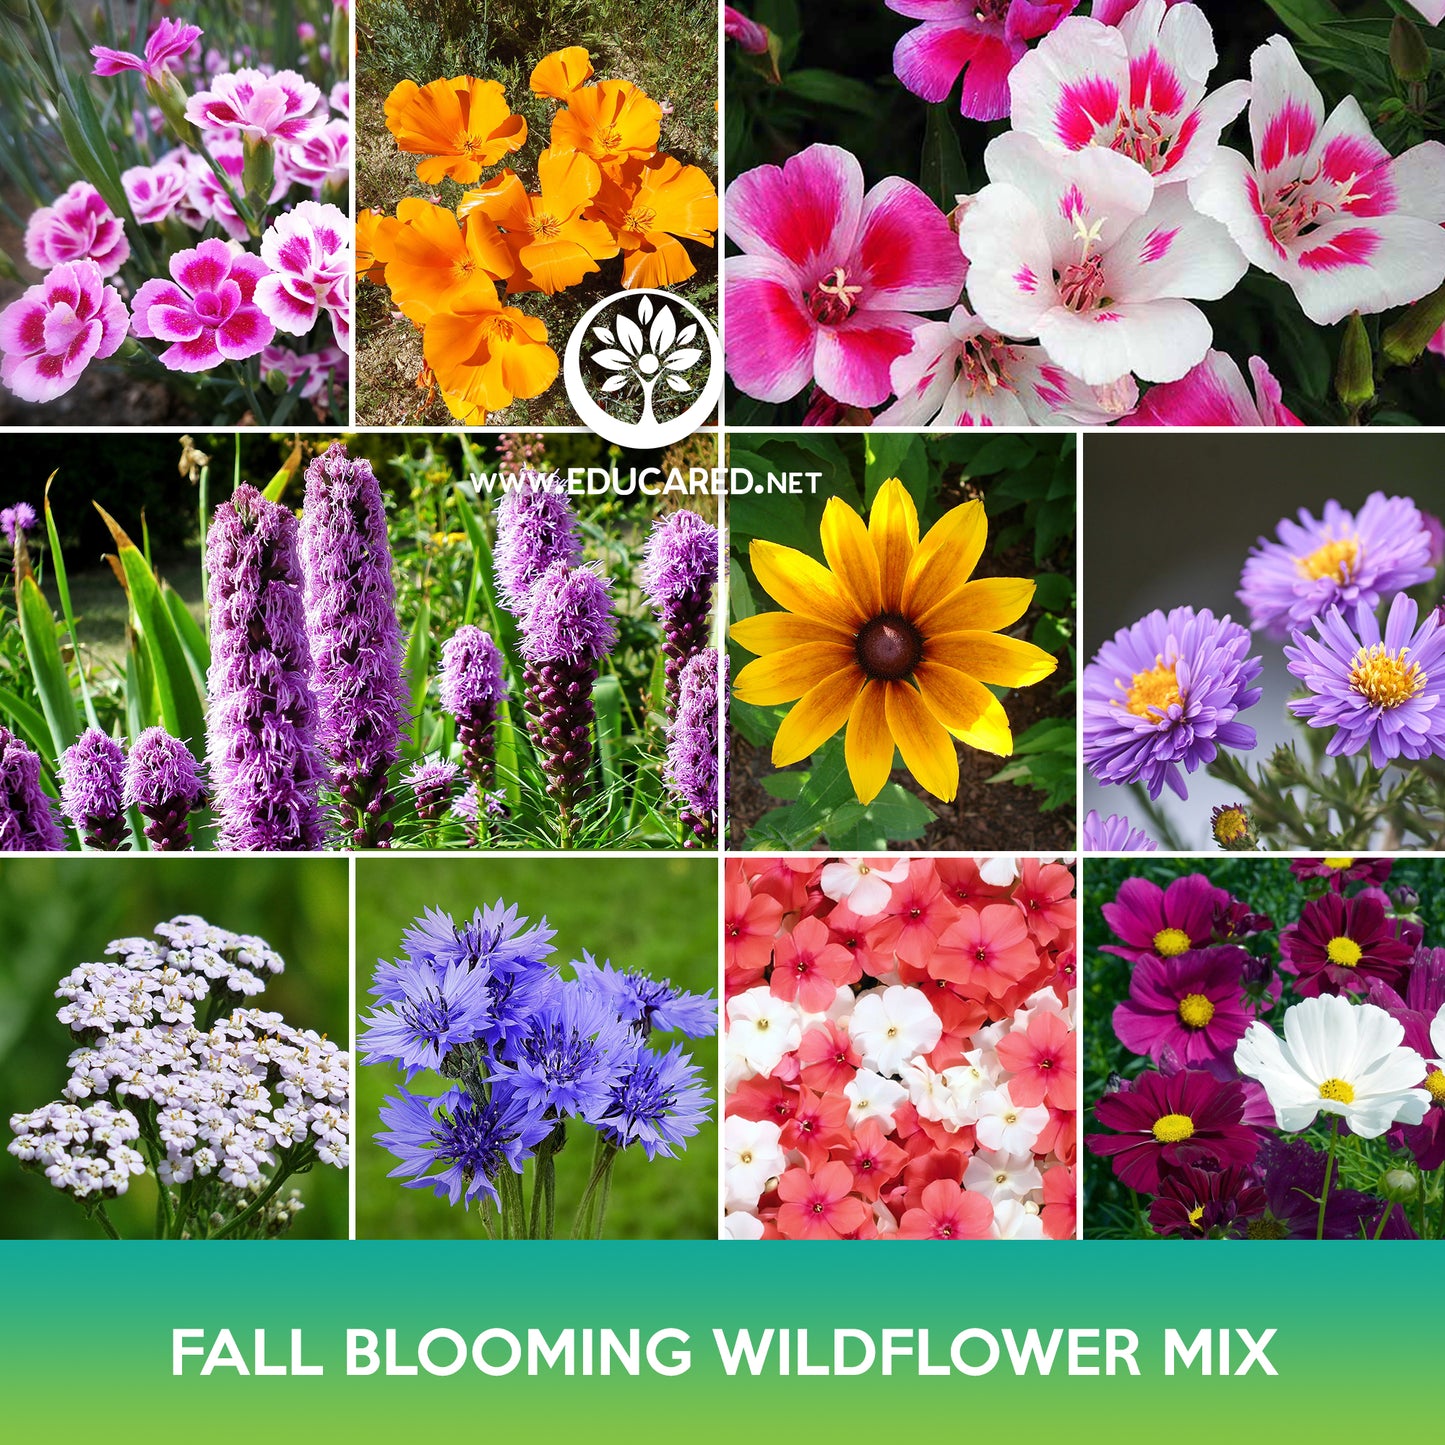 Fall Blooming Wildflower Mix Seeds